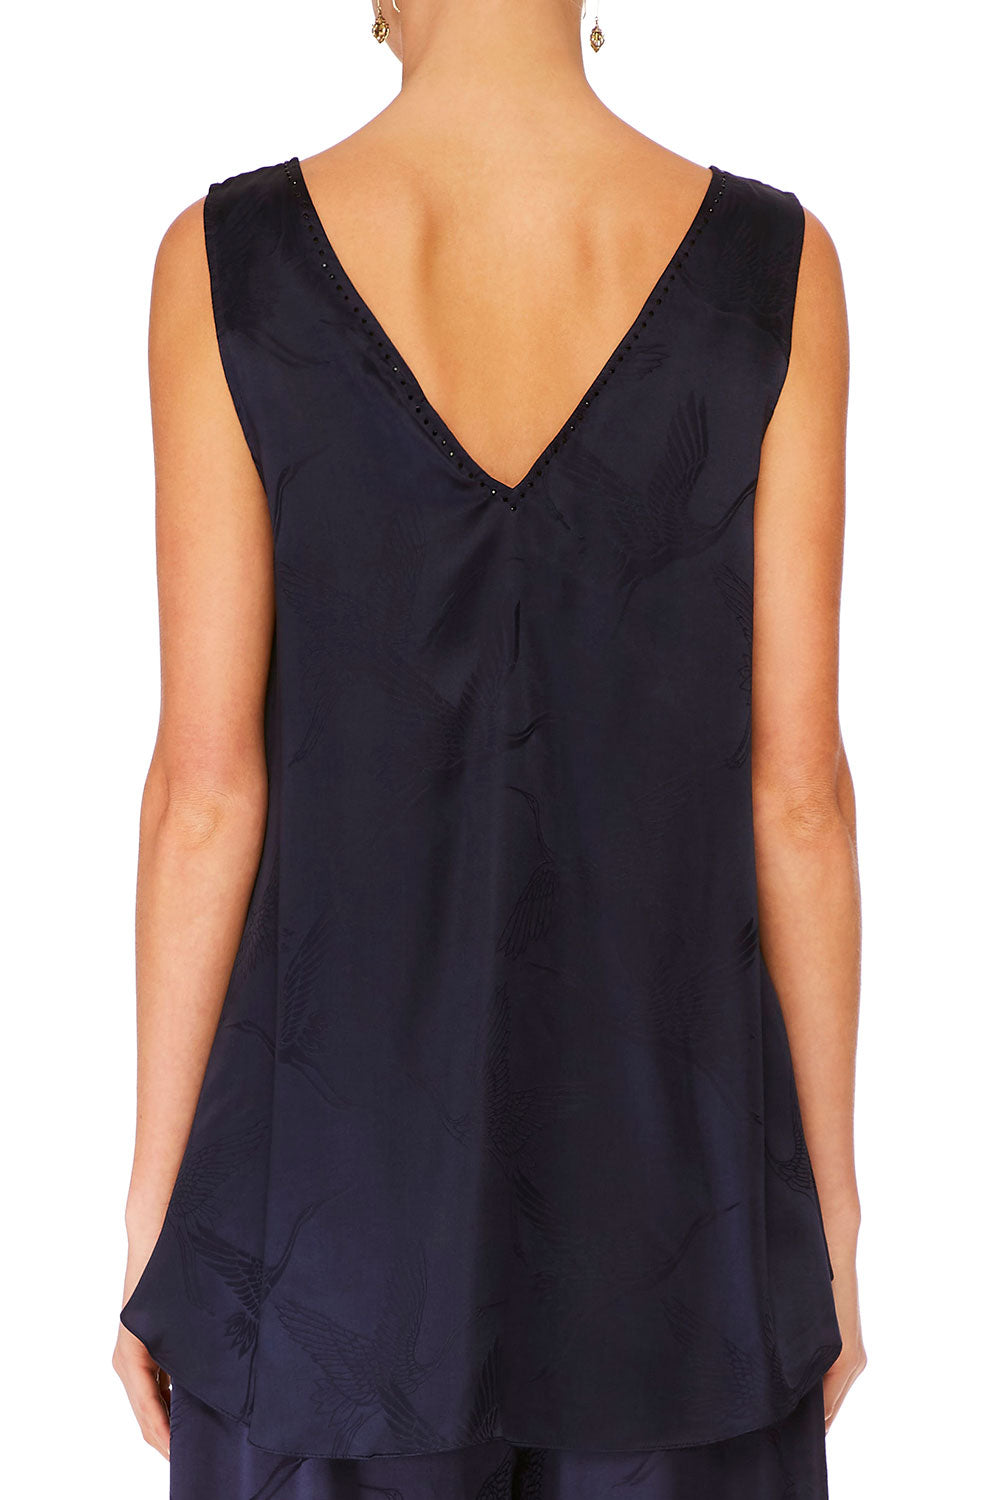 WIDE STRAP U-RING TOP SOLID NAVY